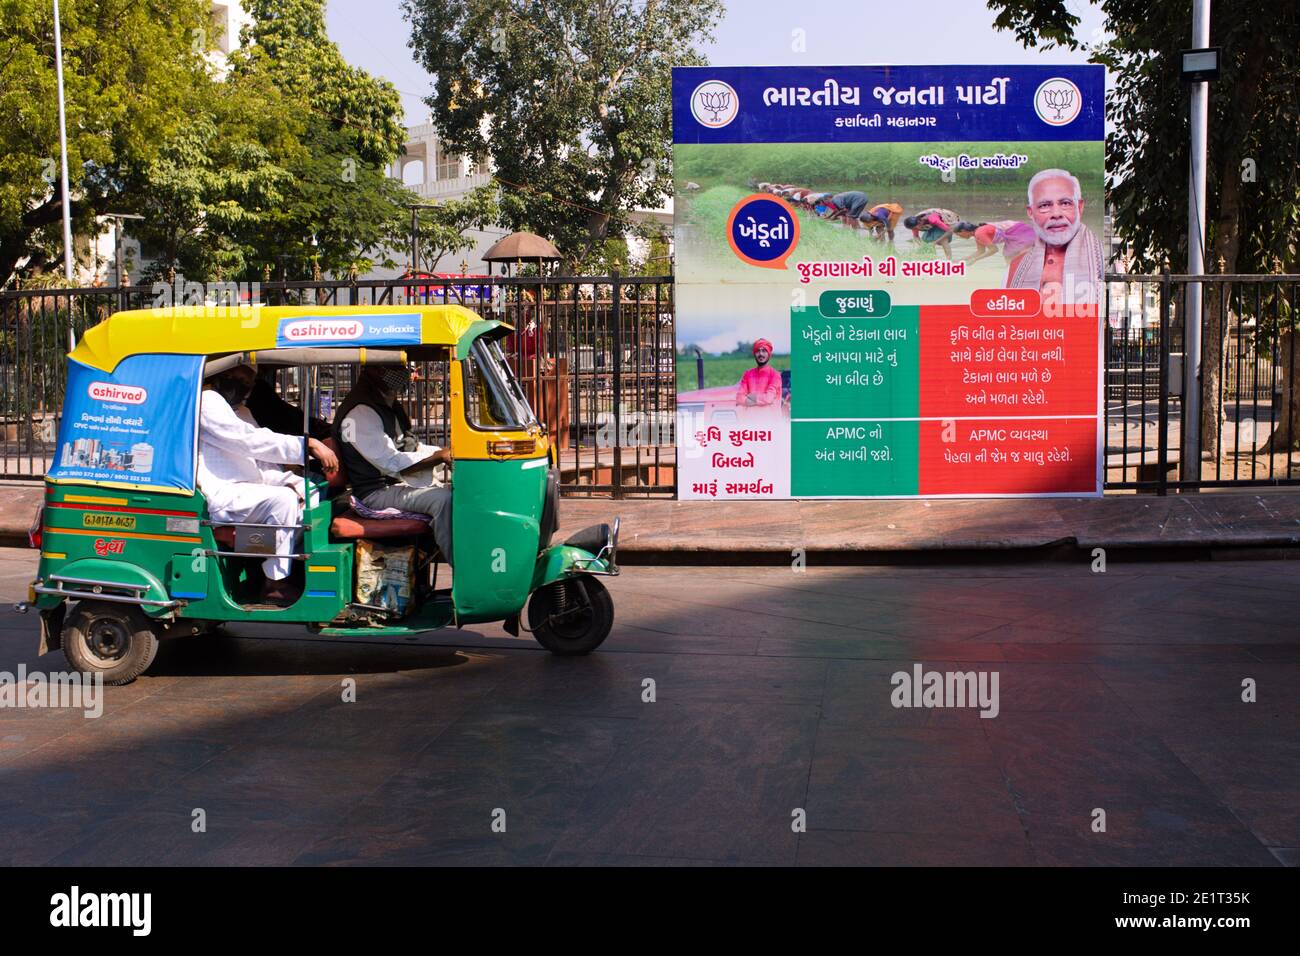 An auto rikshaw in Ahmedabad, Gujarat drives past a poster explaining 2020 farm law reforms lies versus facts put up the ruling Bhartiya Janta Party. Stock Photo